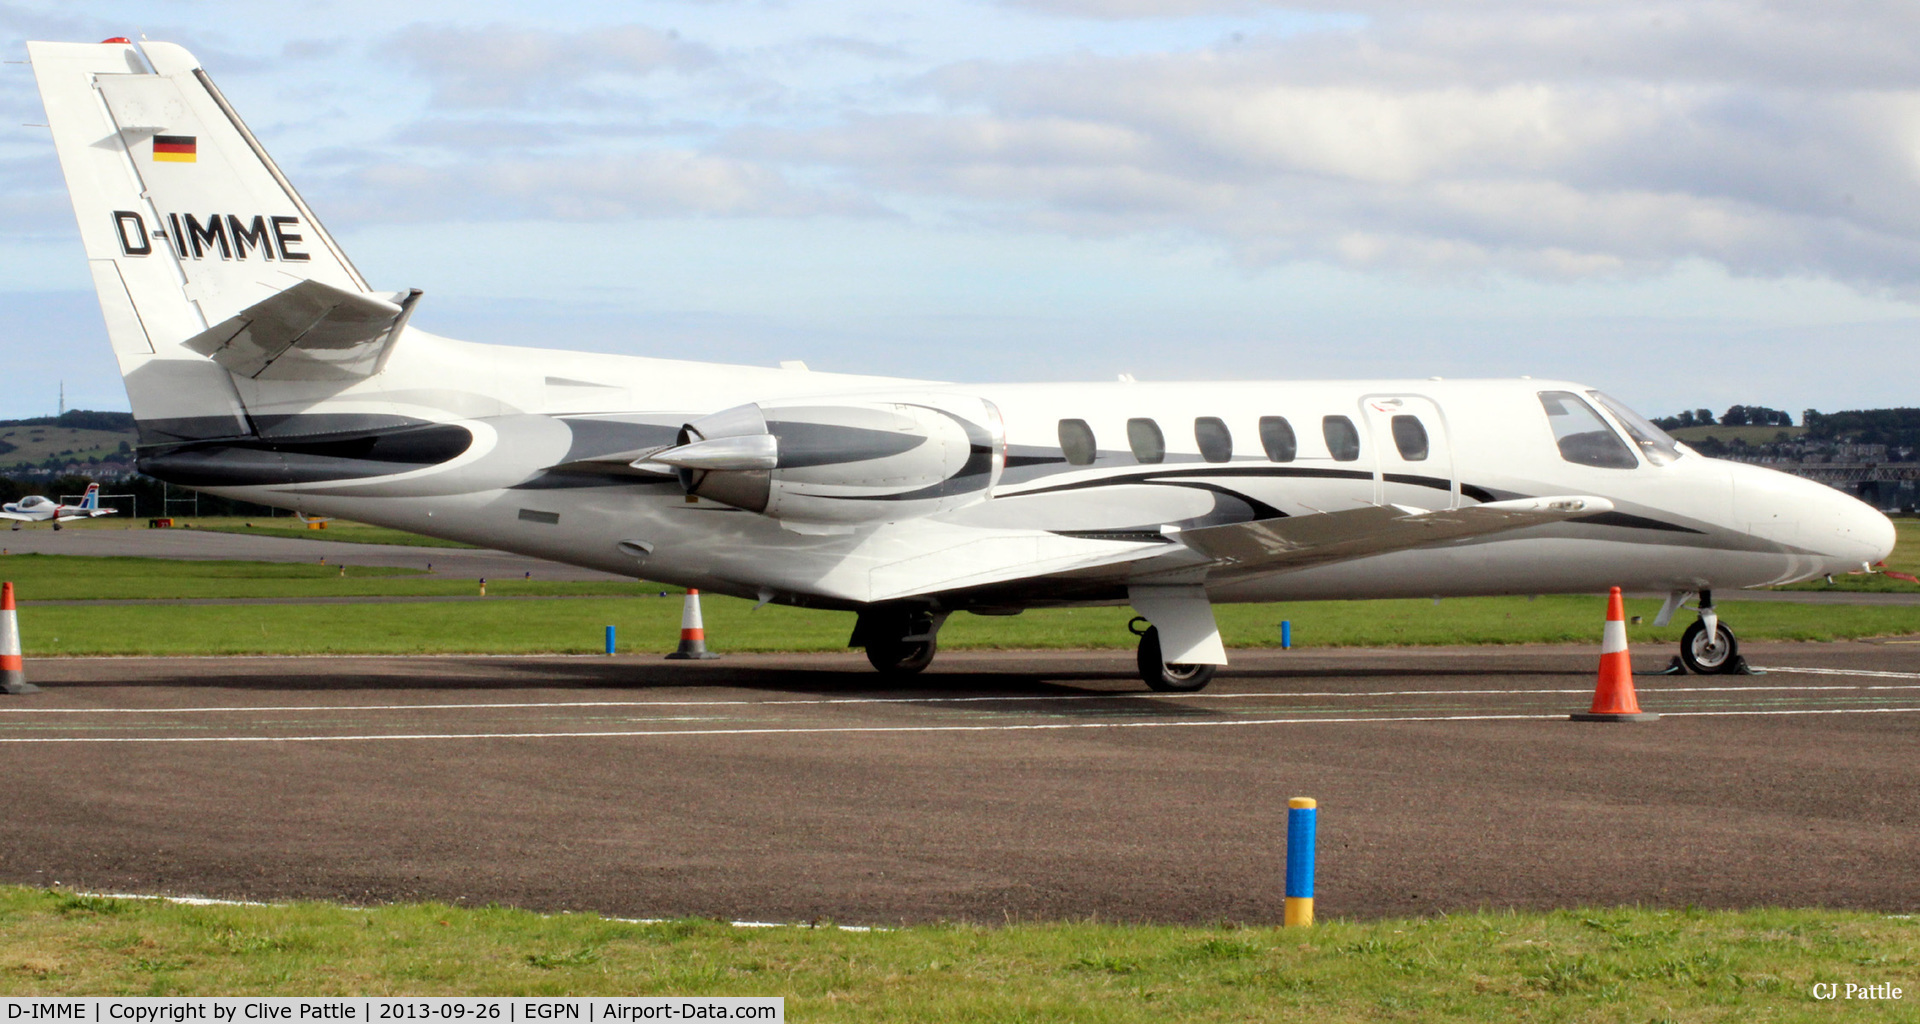 D-IMME, 1999 Cessna 551 Citation II/SP C/N 551-0400, Overnight stayer at Dundee Riverside EGPN